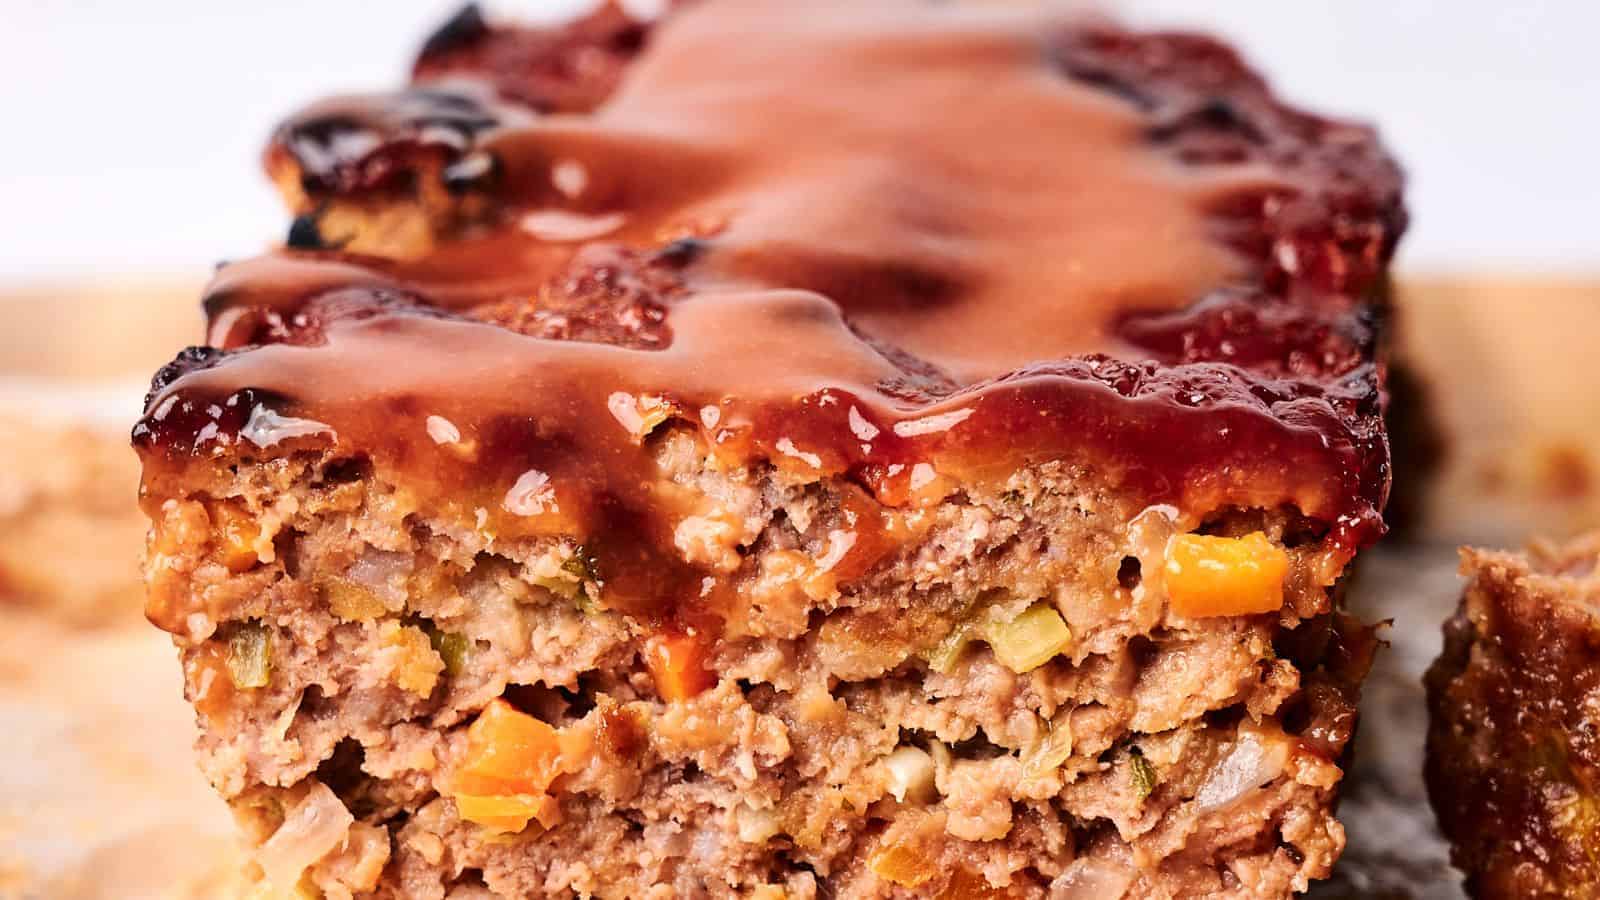 A close-up of a savory meatloaf slice topped with a glossy sauce. The hearty meatloaf reveals visible chunks of vegetables like carrots and celery.